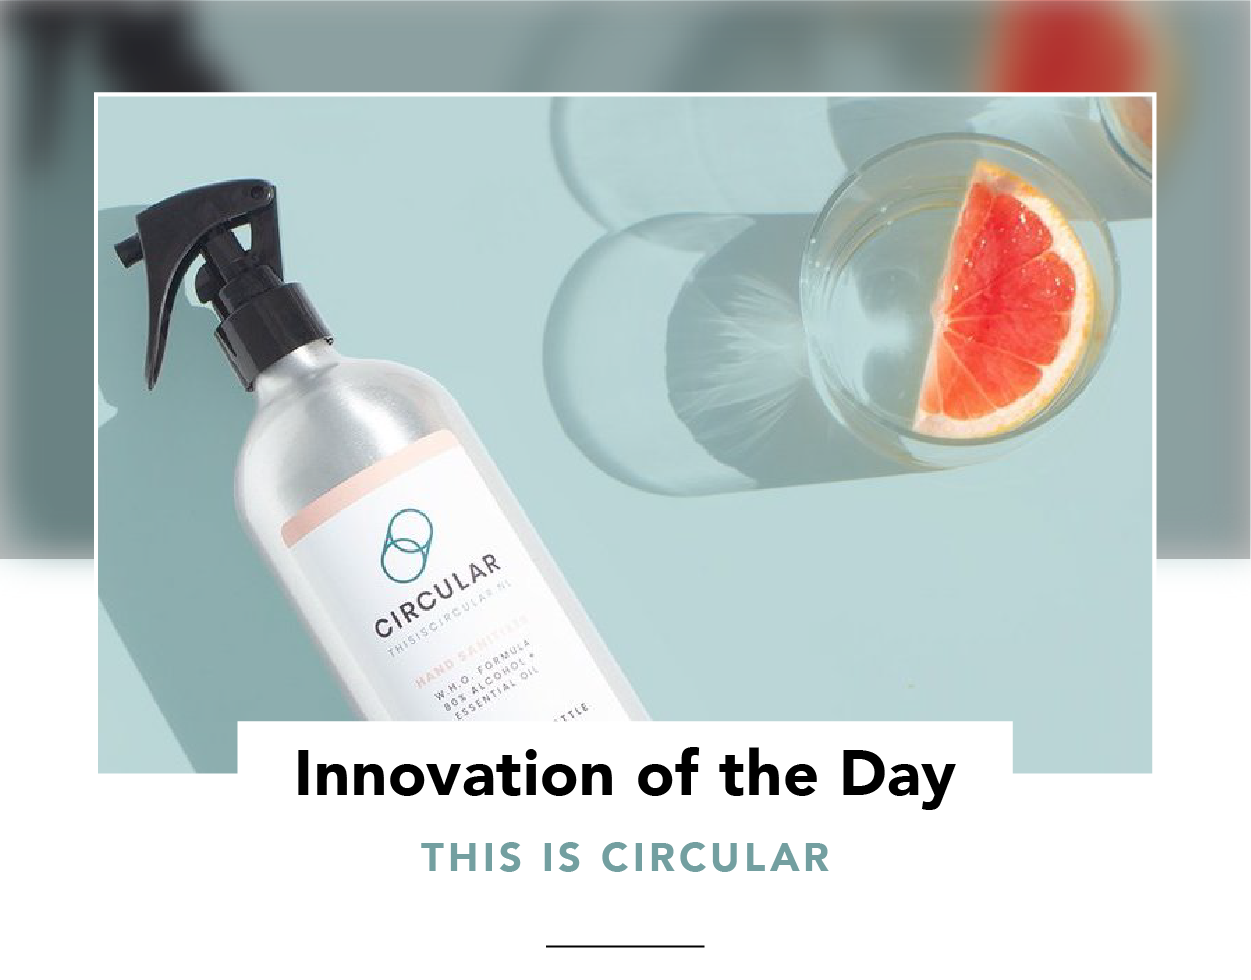 Cleaning product in a circular bottle (and a glass of water)